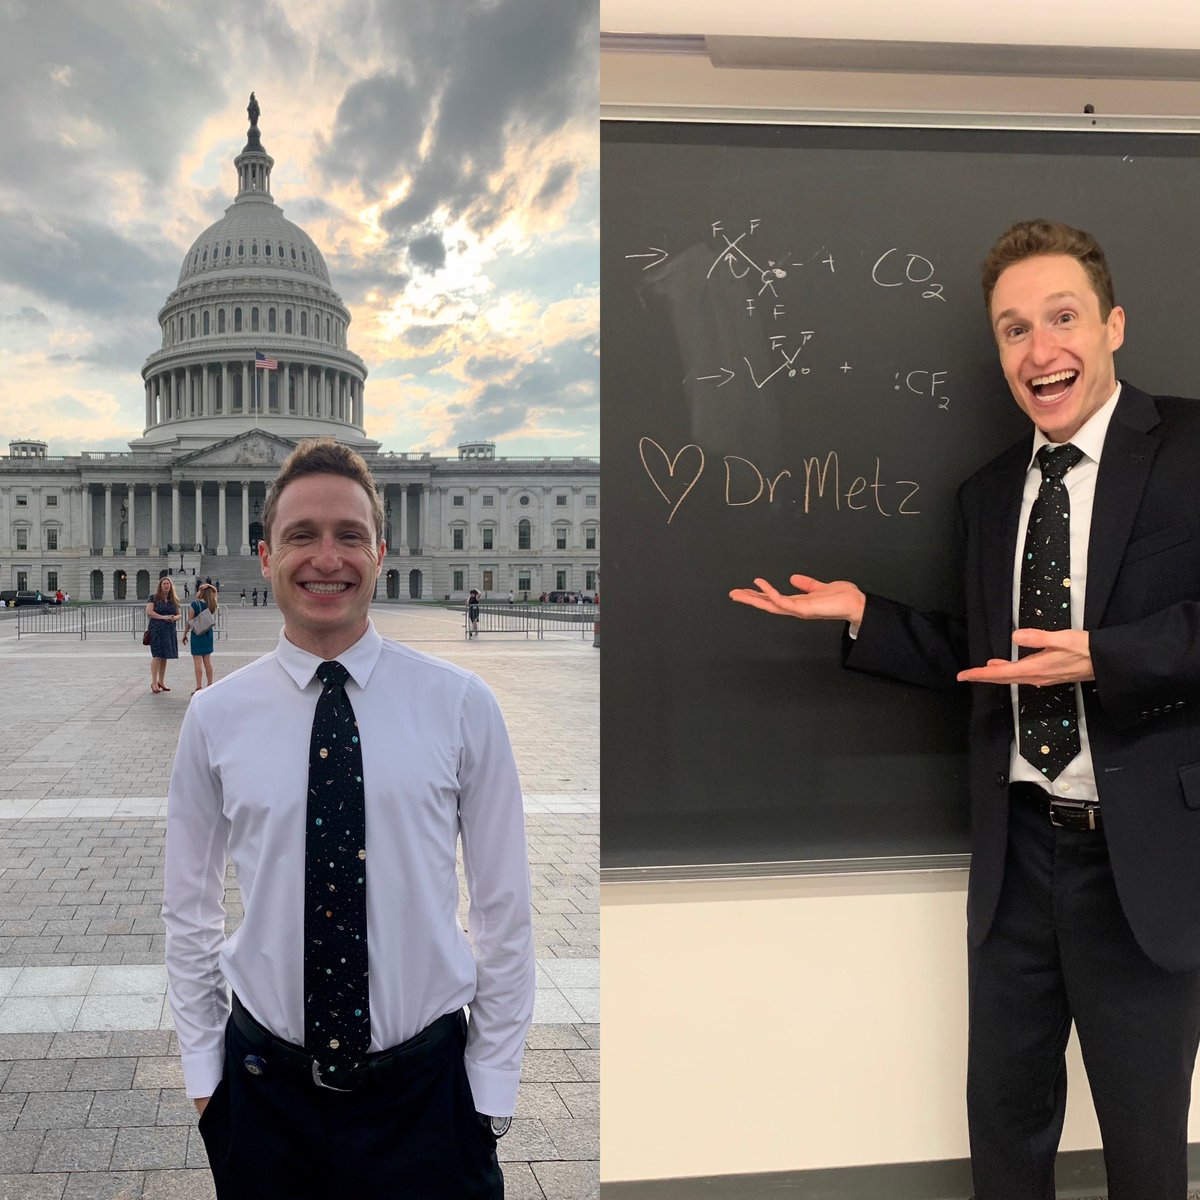 One year ago today I defended my PhD at @riceuniversity, and today, I staffed a markup in the House of Representatives on environmental policy as part of my Fellowship with @aaas_stpf. It’s been a great year, very different than my PhD, and I’m so grateful to be here! 
#scipol